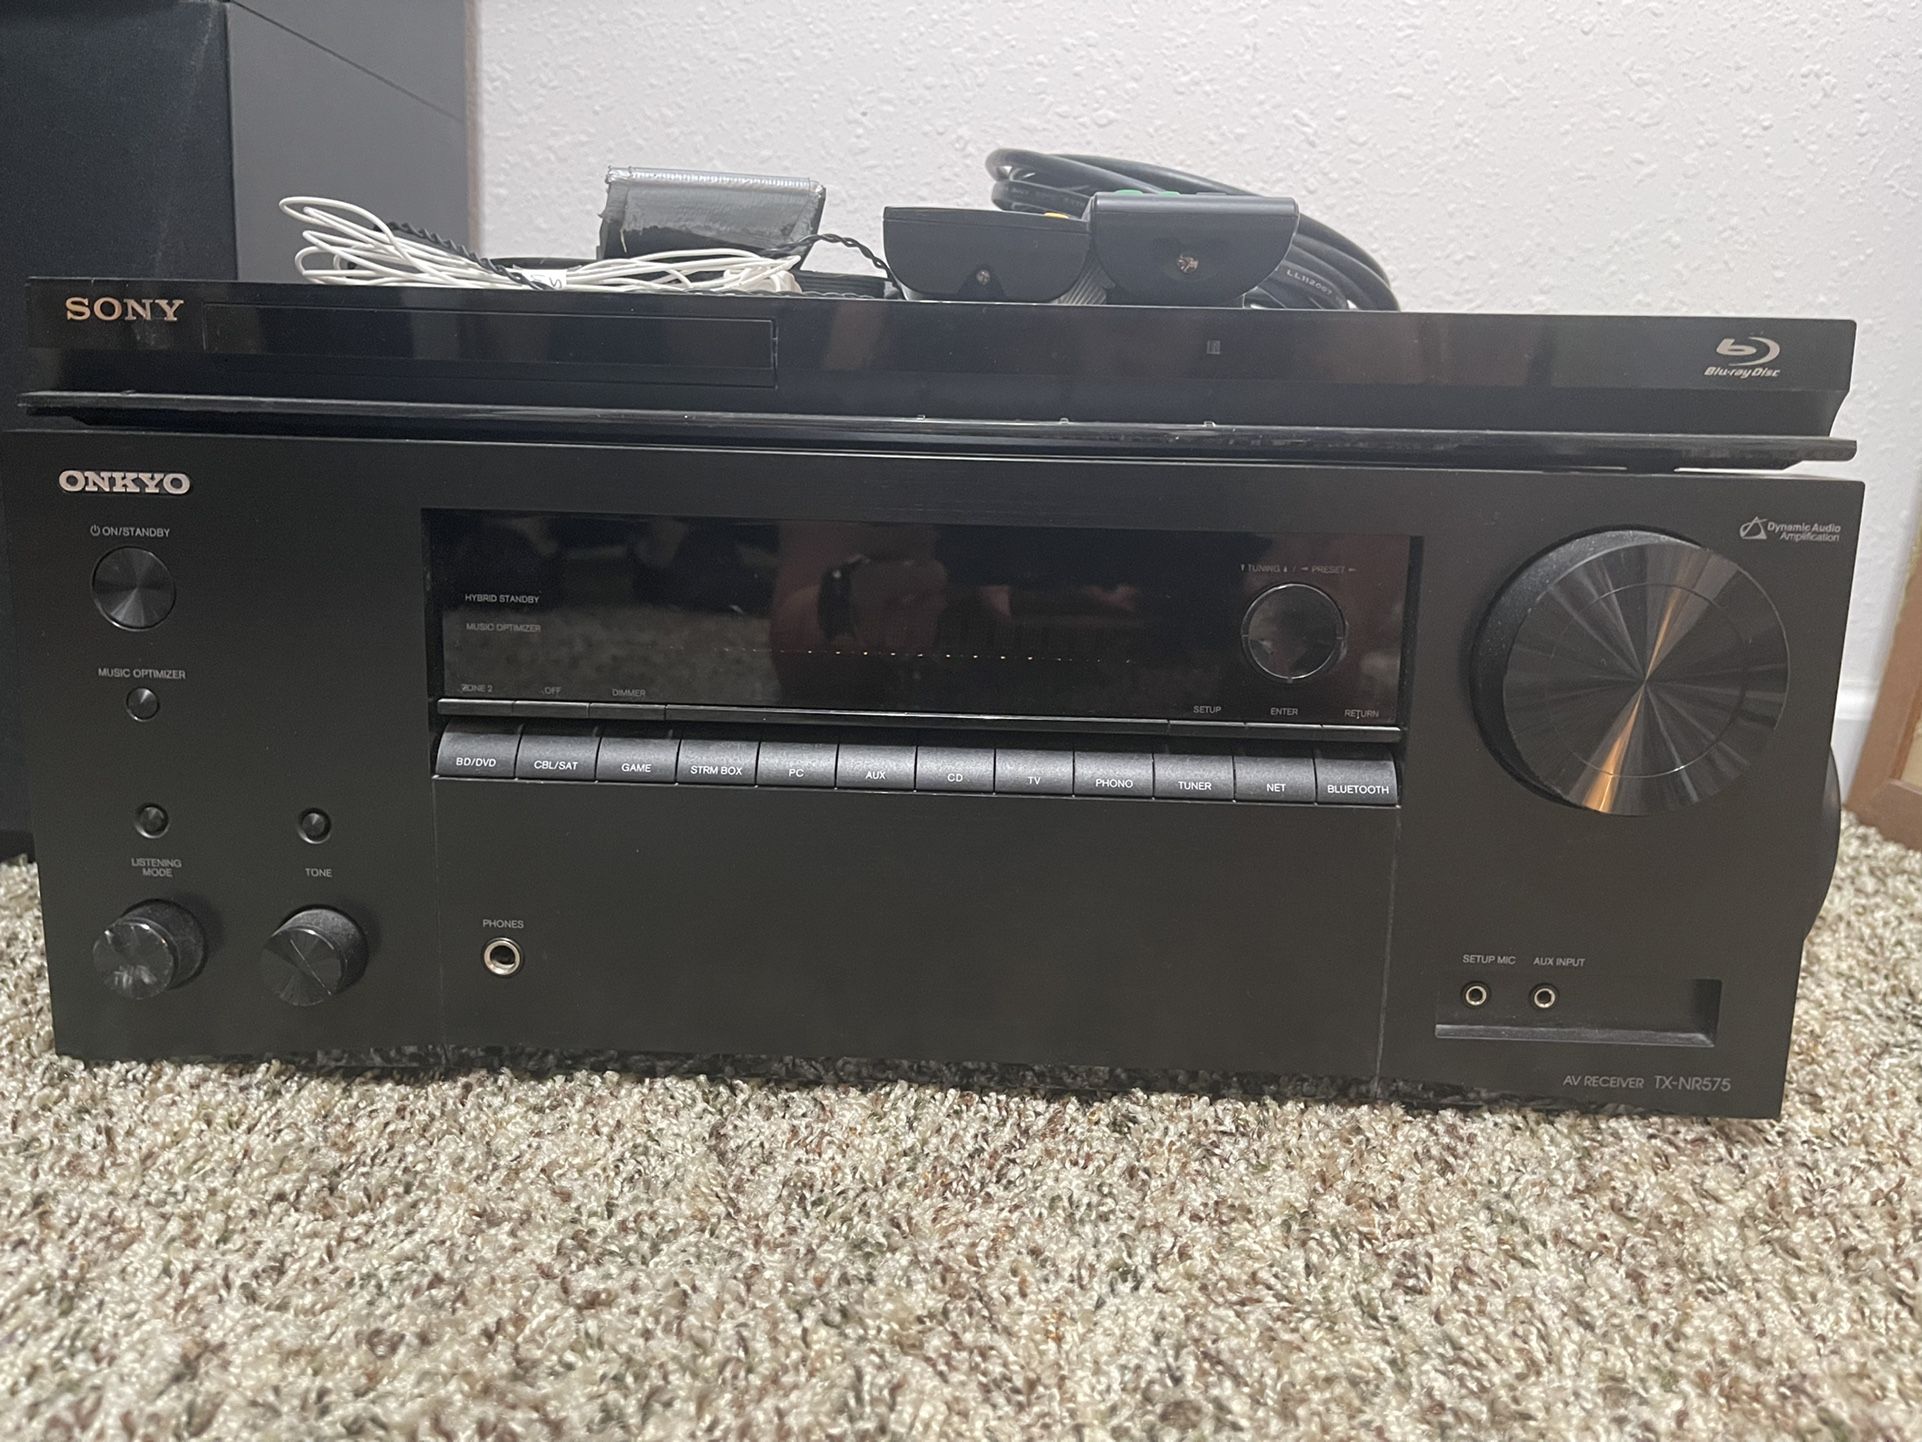 Onkyo Stereo Receiver & Sony Network Blu-ray Player, W/ 7 Yamaha Speakers/Center, Sub & Wall Mounts